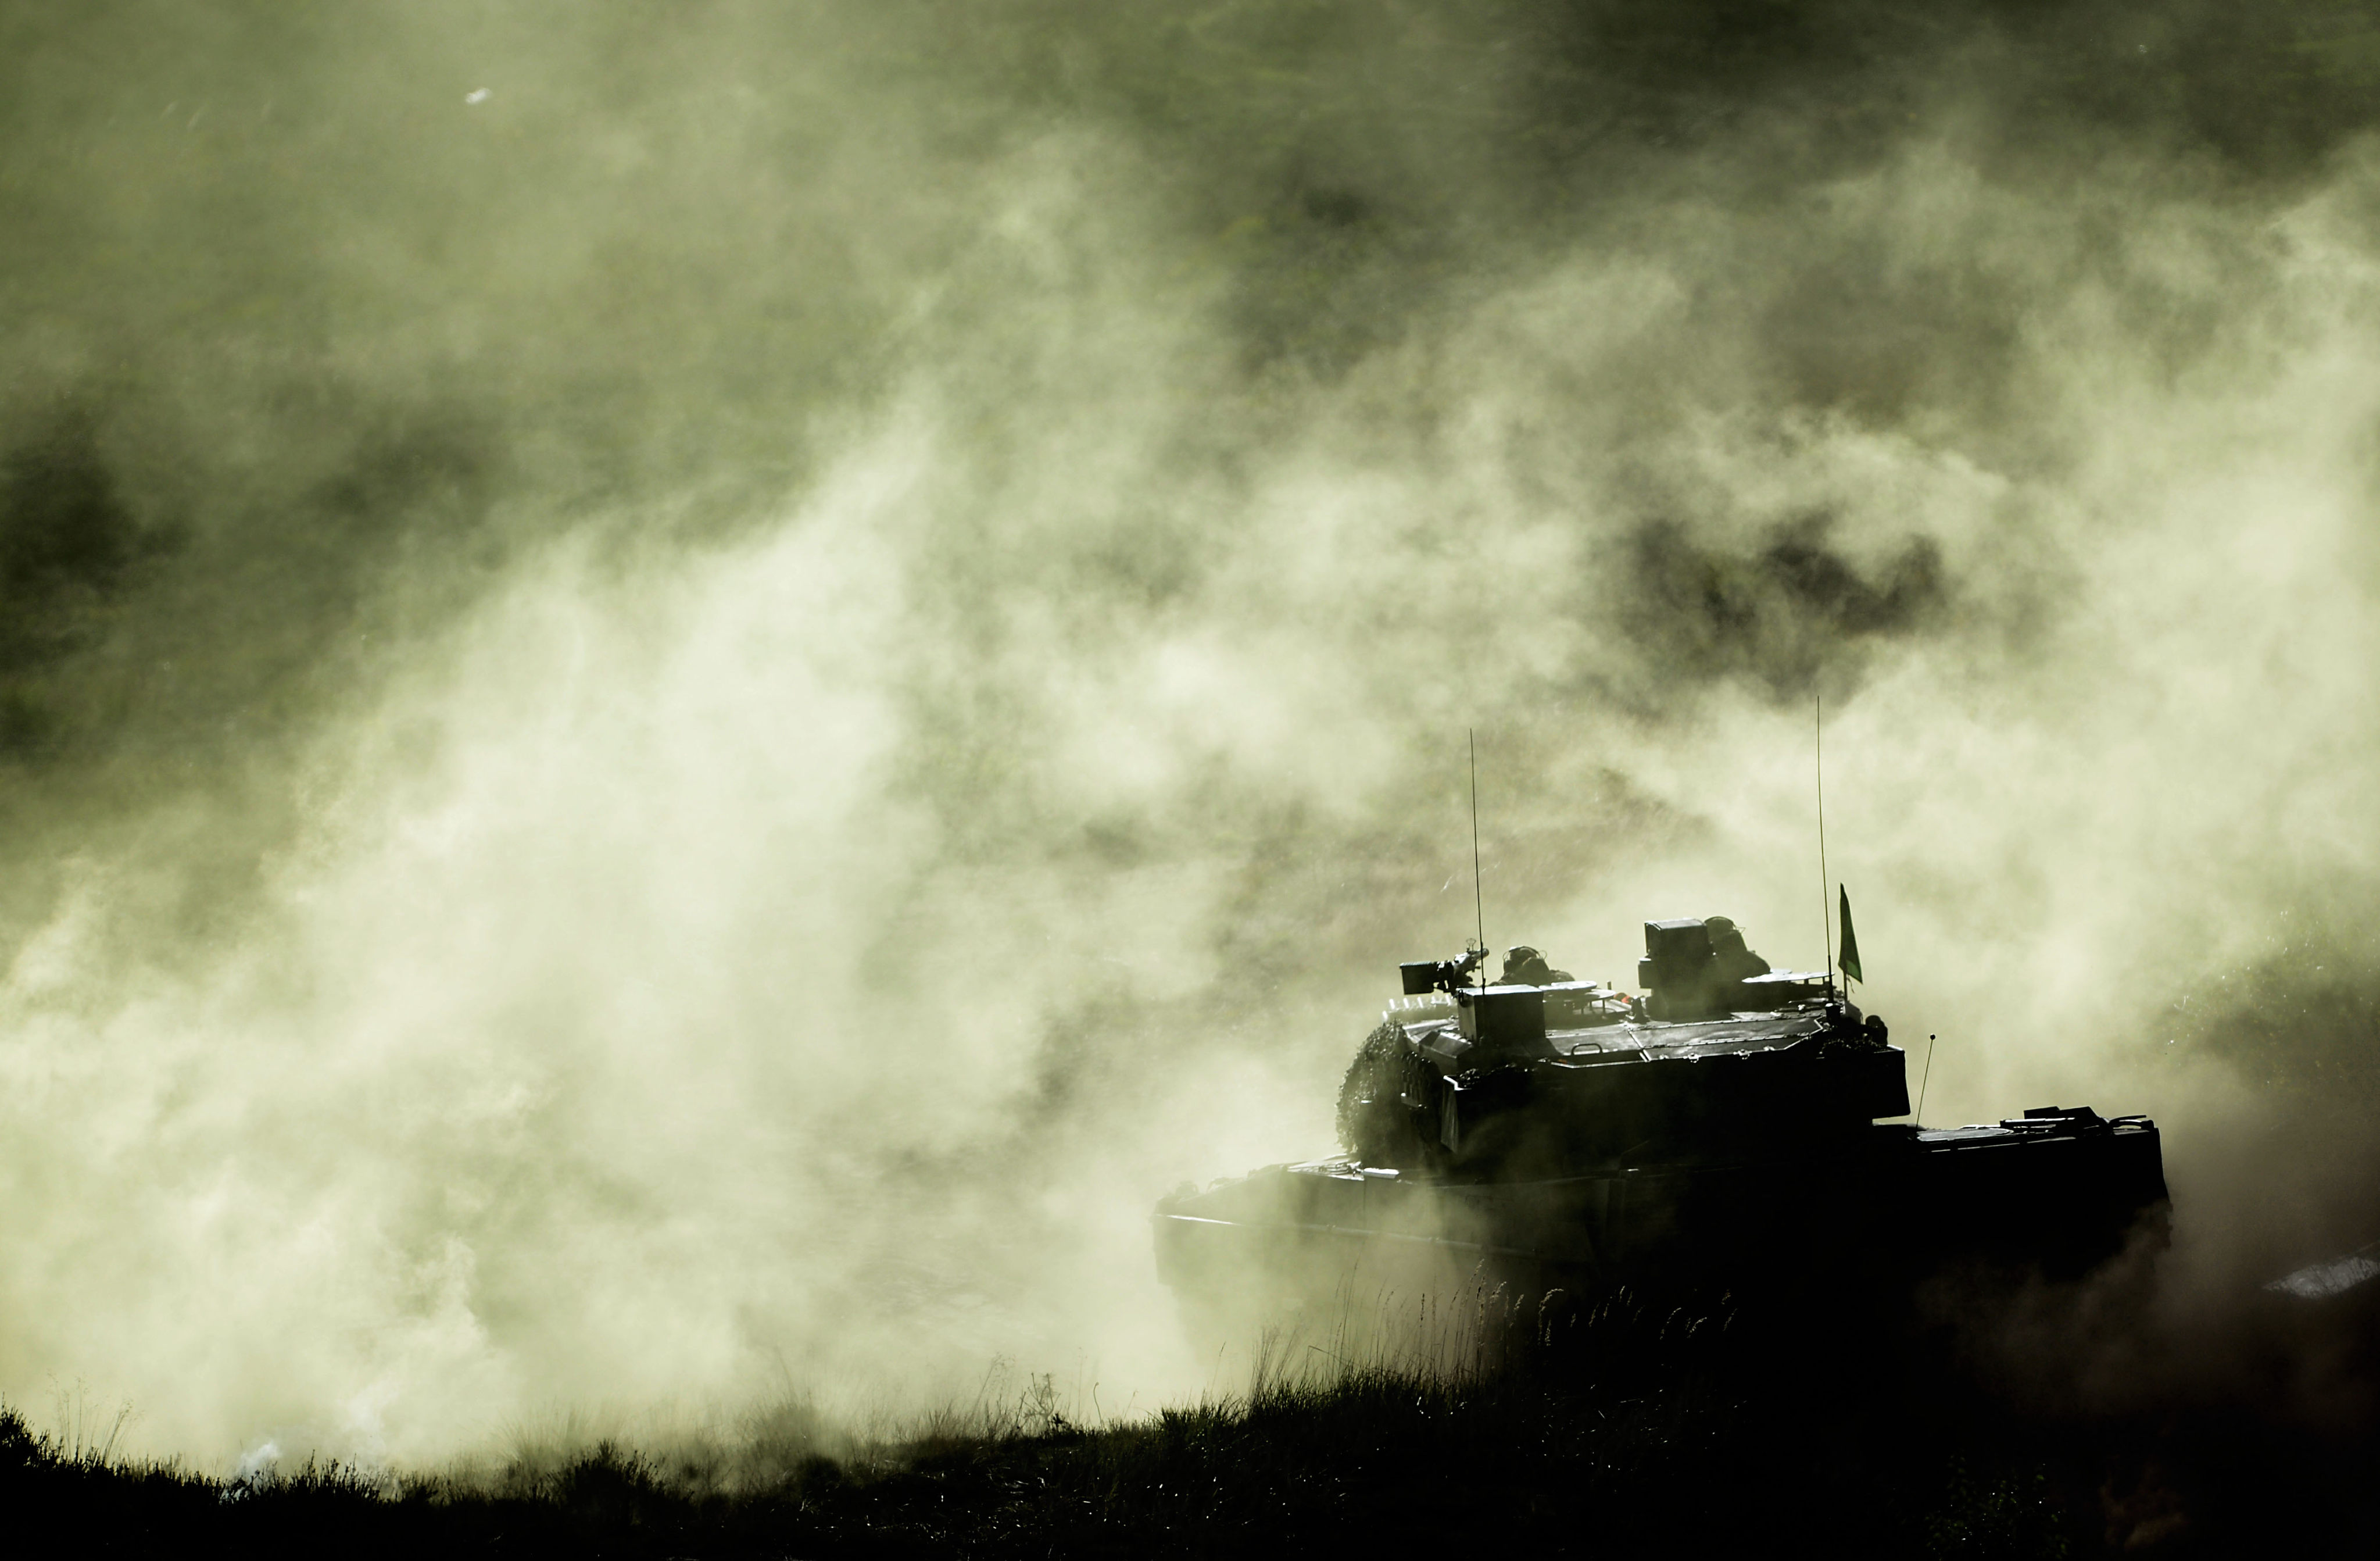 A Leopard 2 main battle tank fires during Bundeswehr land operations exercise in Bergen, Germany in October 2013. Photo: dpa